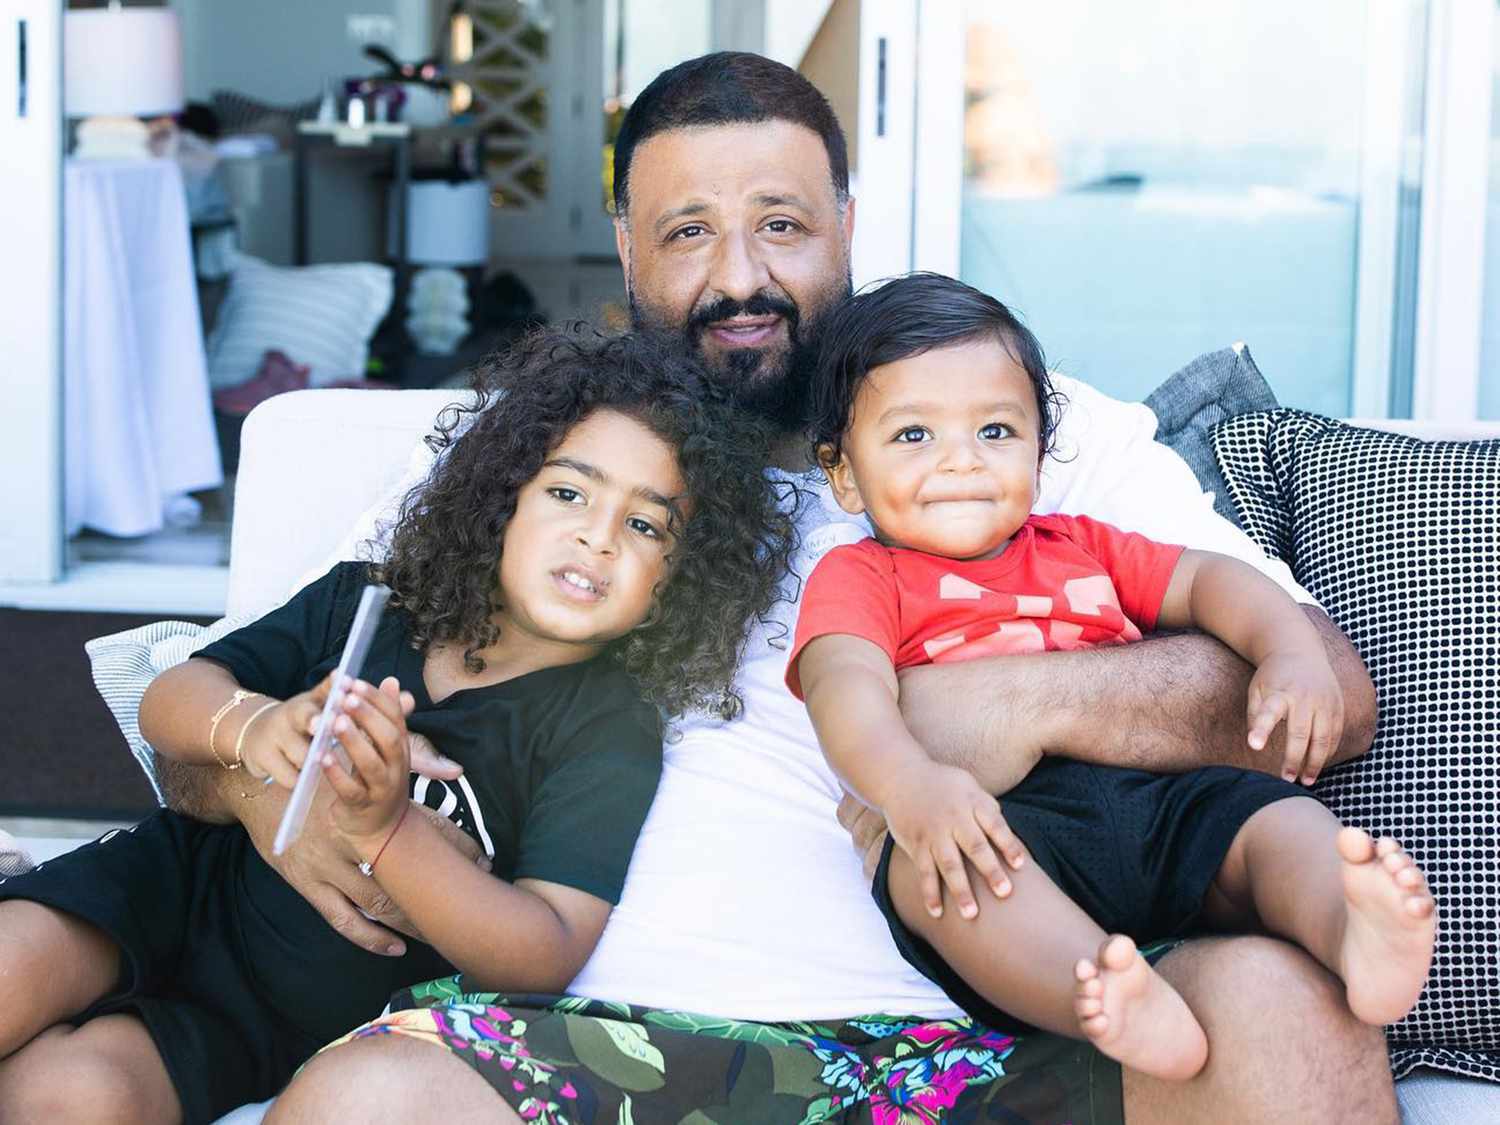 DJ Khaled's 2 Kids: All About Asahd and Aalam